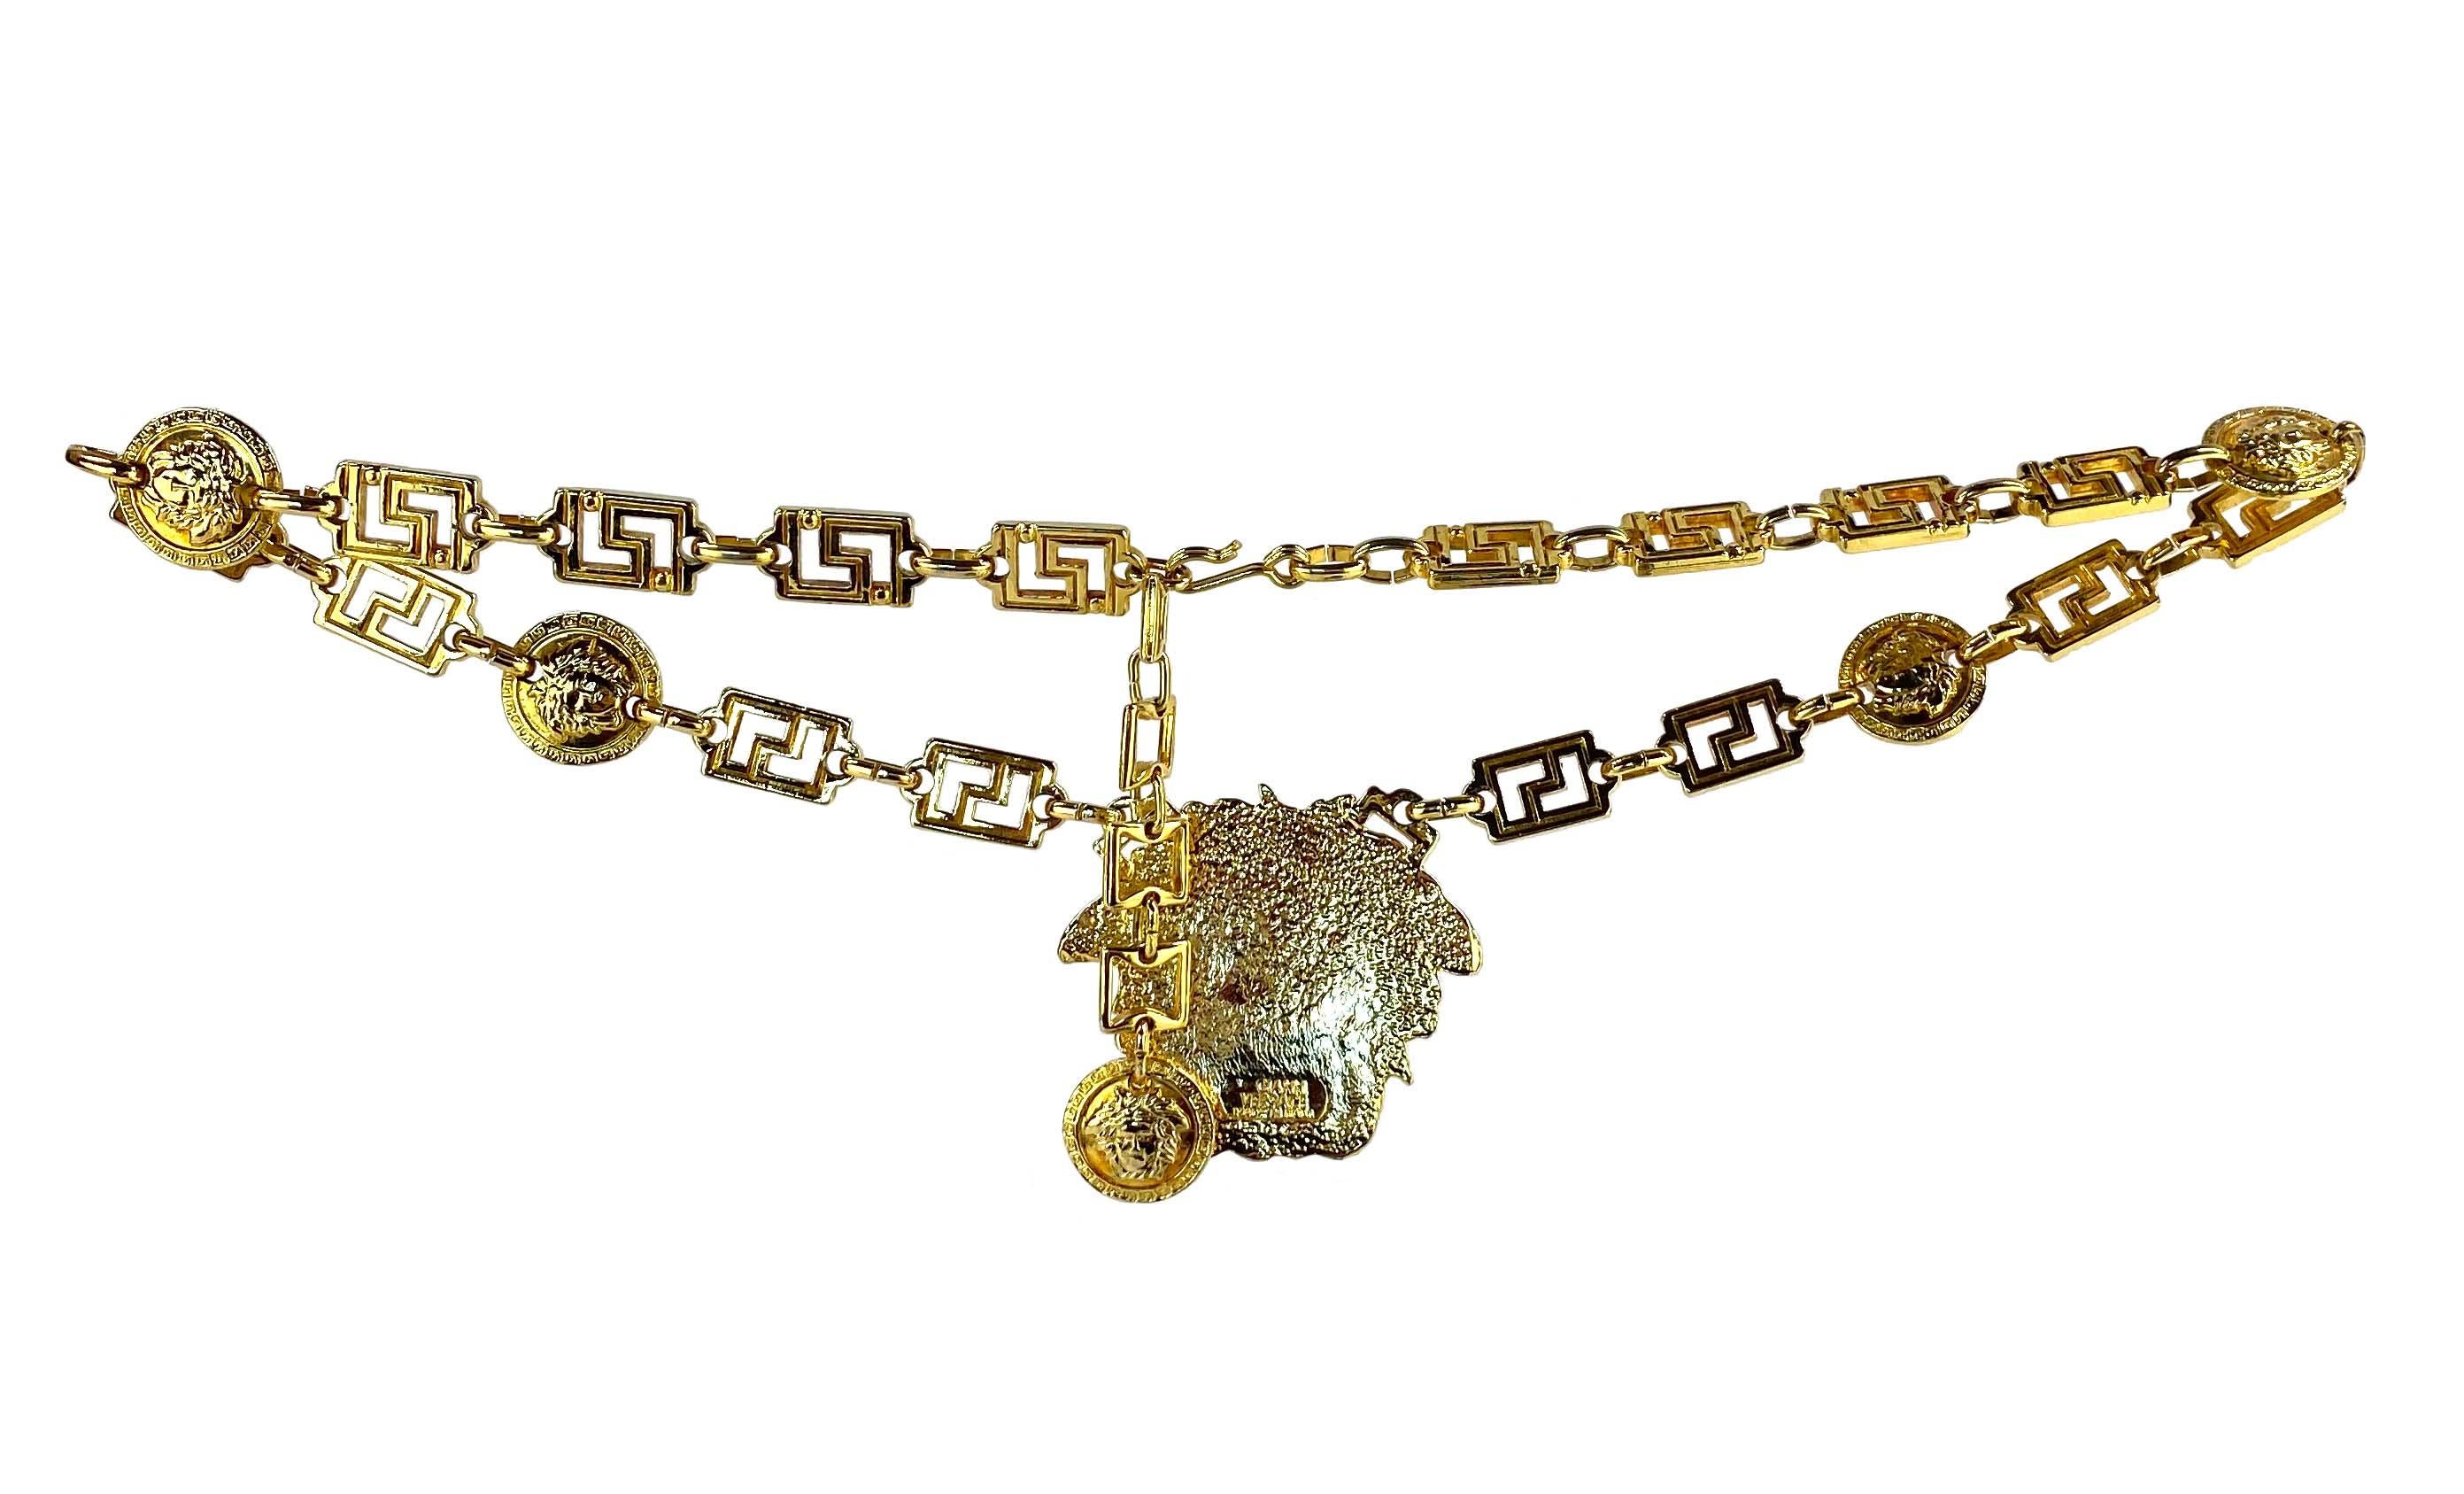 Presenting a stunning gold Medusa Greek key Gianni Versace chain belt/necklace, designed by Gianni Versace. This stunning belt is constructed of gold colored metal and features a Greek key chain with Versace Medusa medallions. Front and center, is